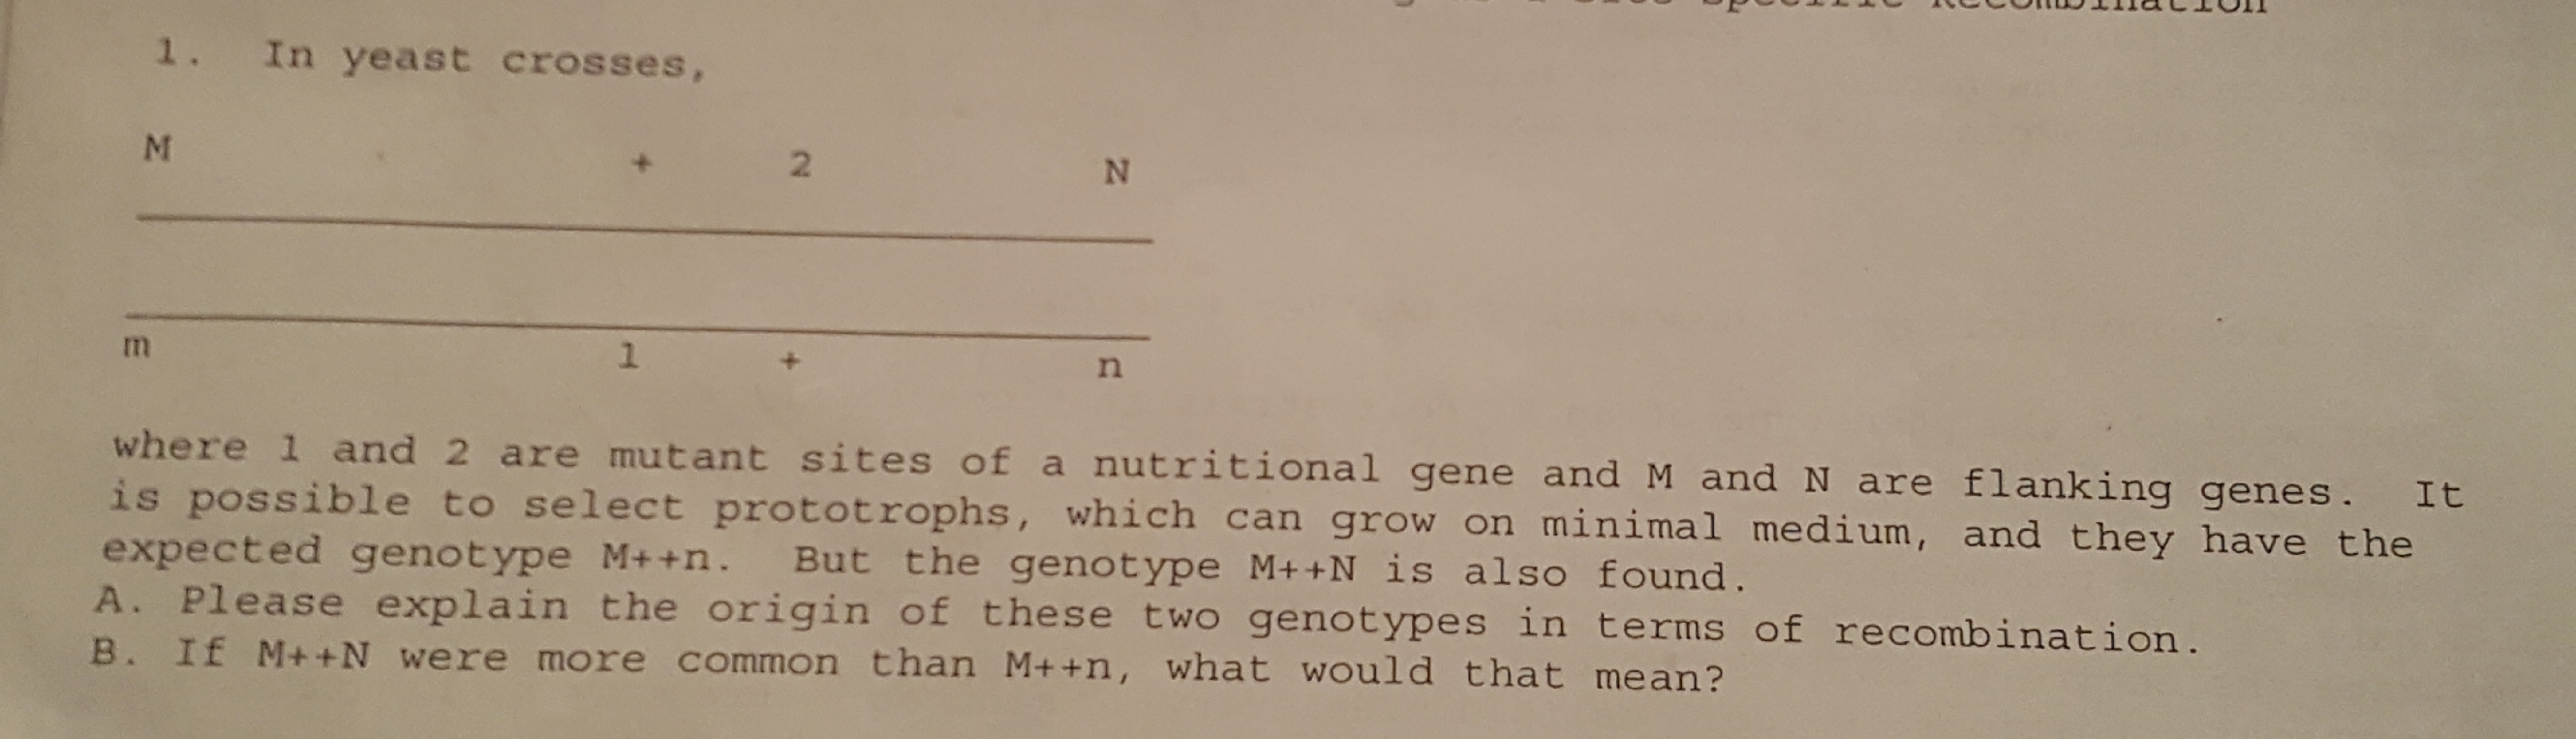 7022IDJITI atiO1l
In yeast crosses,
M.
2
where 1 and 2 are mutant sites of a nutritional gene and M and N are flanking genes.
is possible to select prototrophs, which can grow on minimal medium, and they have the
expected genotype M++n. But the genotype M++N_is also found.
A. Please explain the origin of these two genotypes in terms of recombination.
B. If M++N were more common than M++n, what would that mean?
